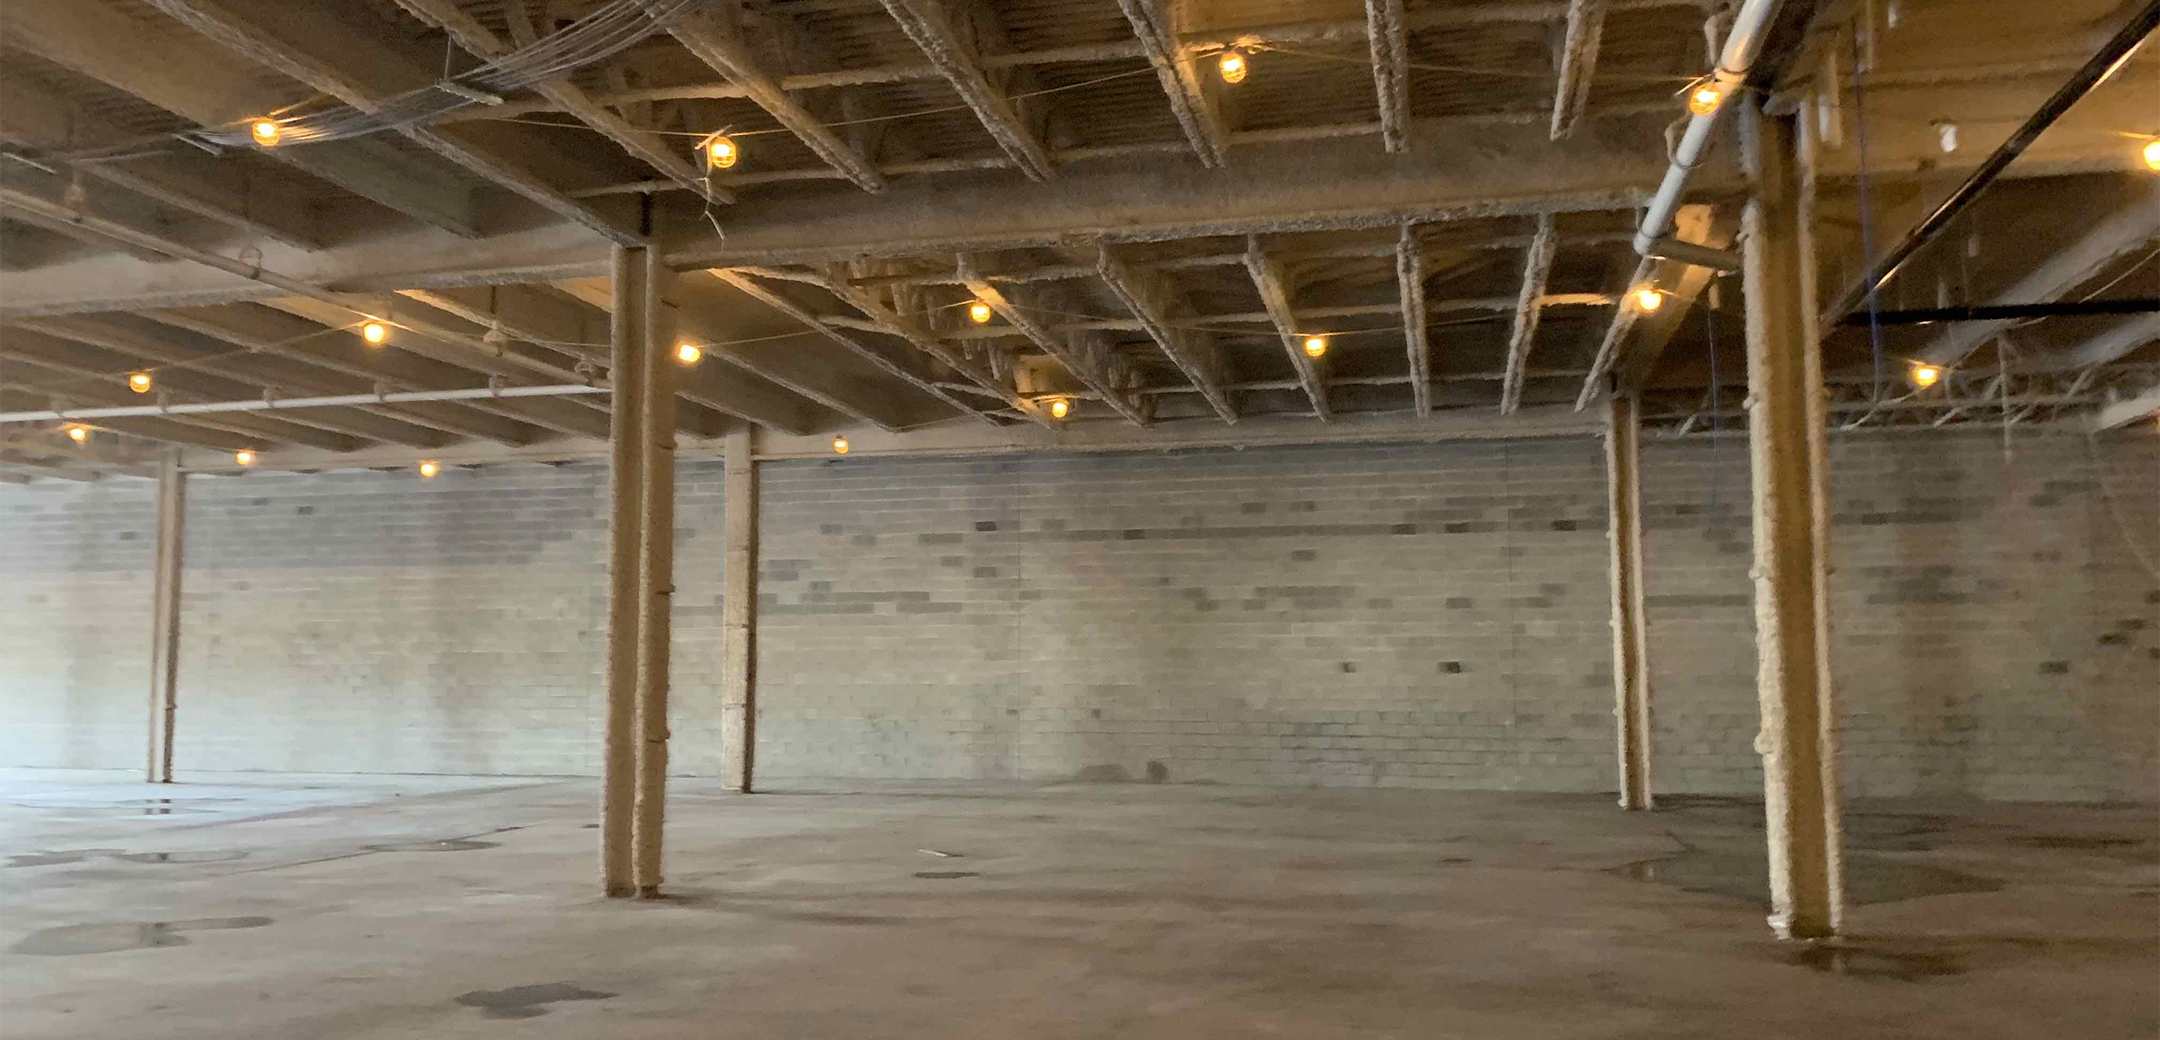 An angled interior view of the Homegoods building during the construction process, showcasing the metal steel structure and back brick wall.